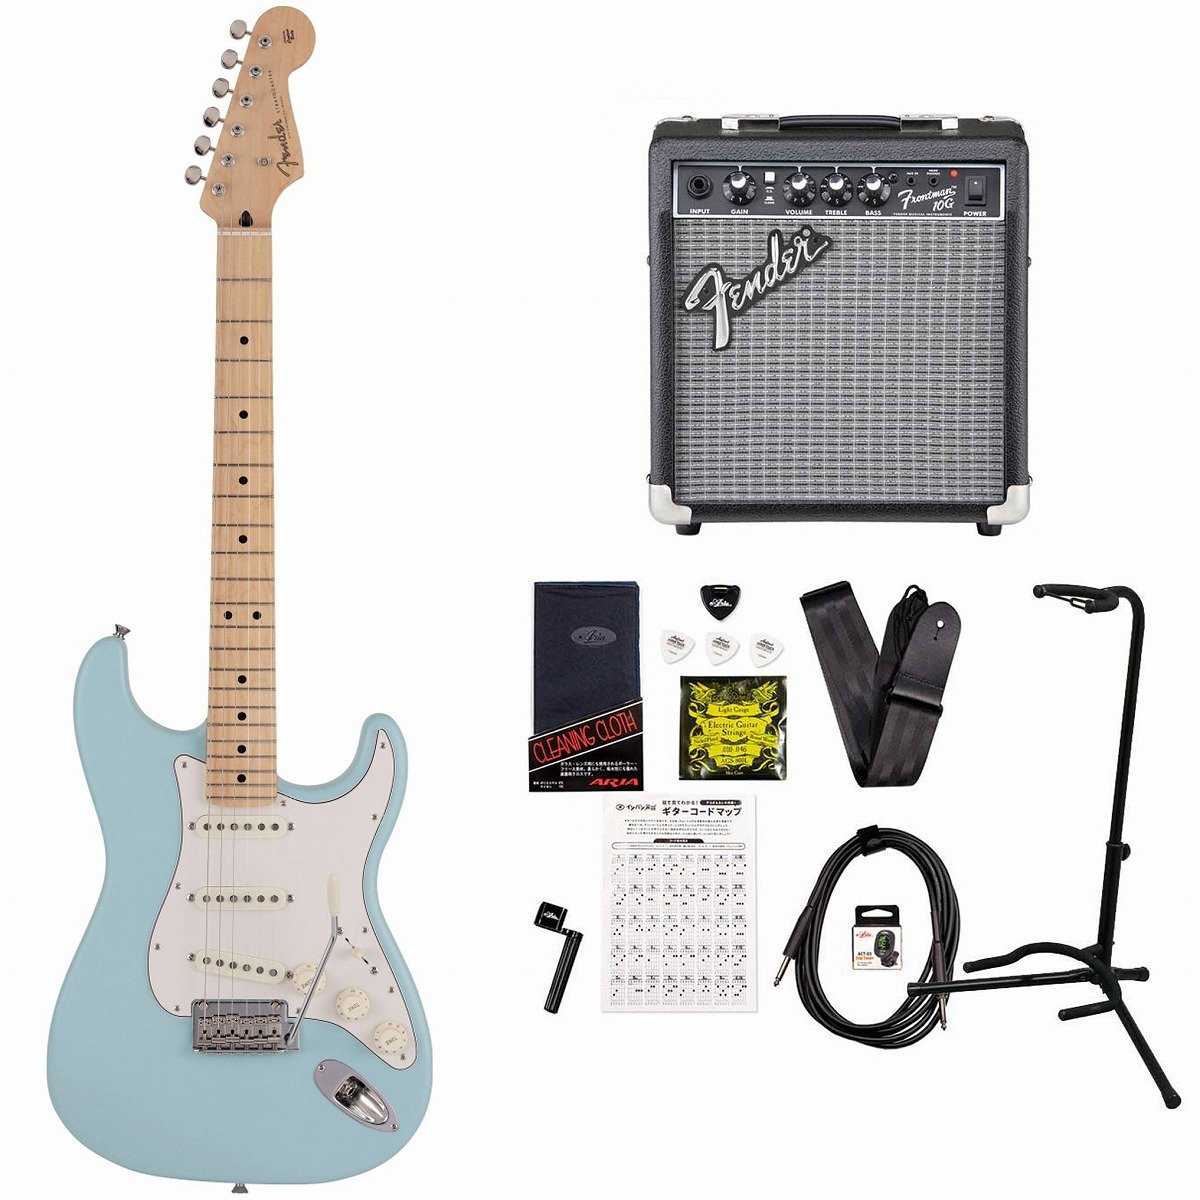 Fender / Made in Japan Junior Collection Stratocaster Maple Fingerboard Satin Daphne Blue Frontman10GAvtGLM^[S҃Zbgs+4582600680067t